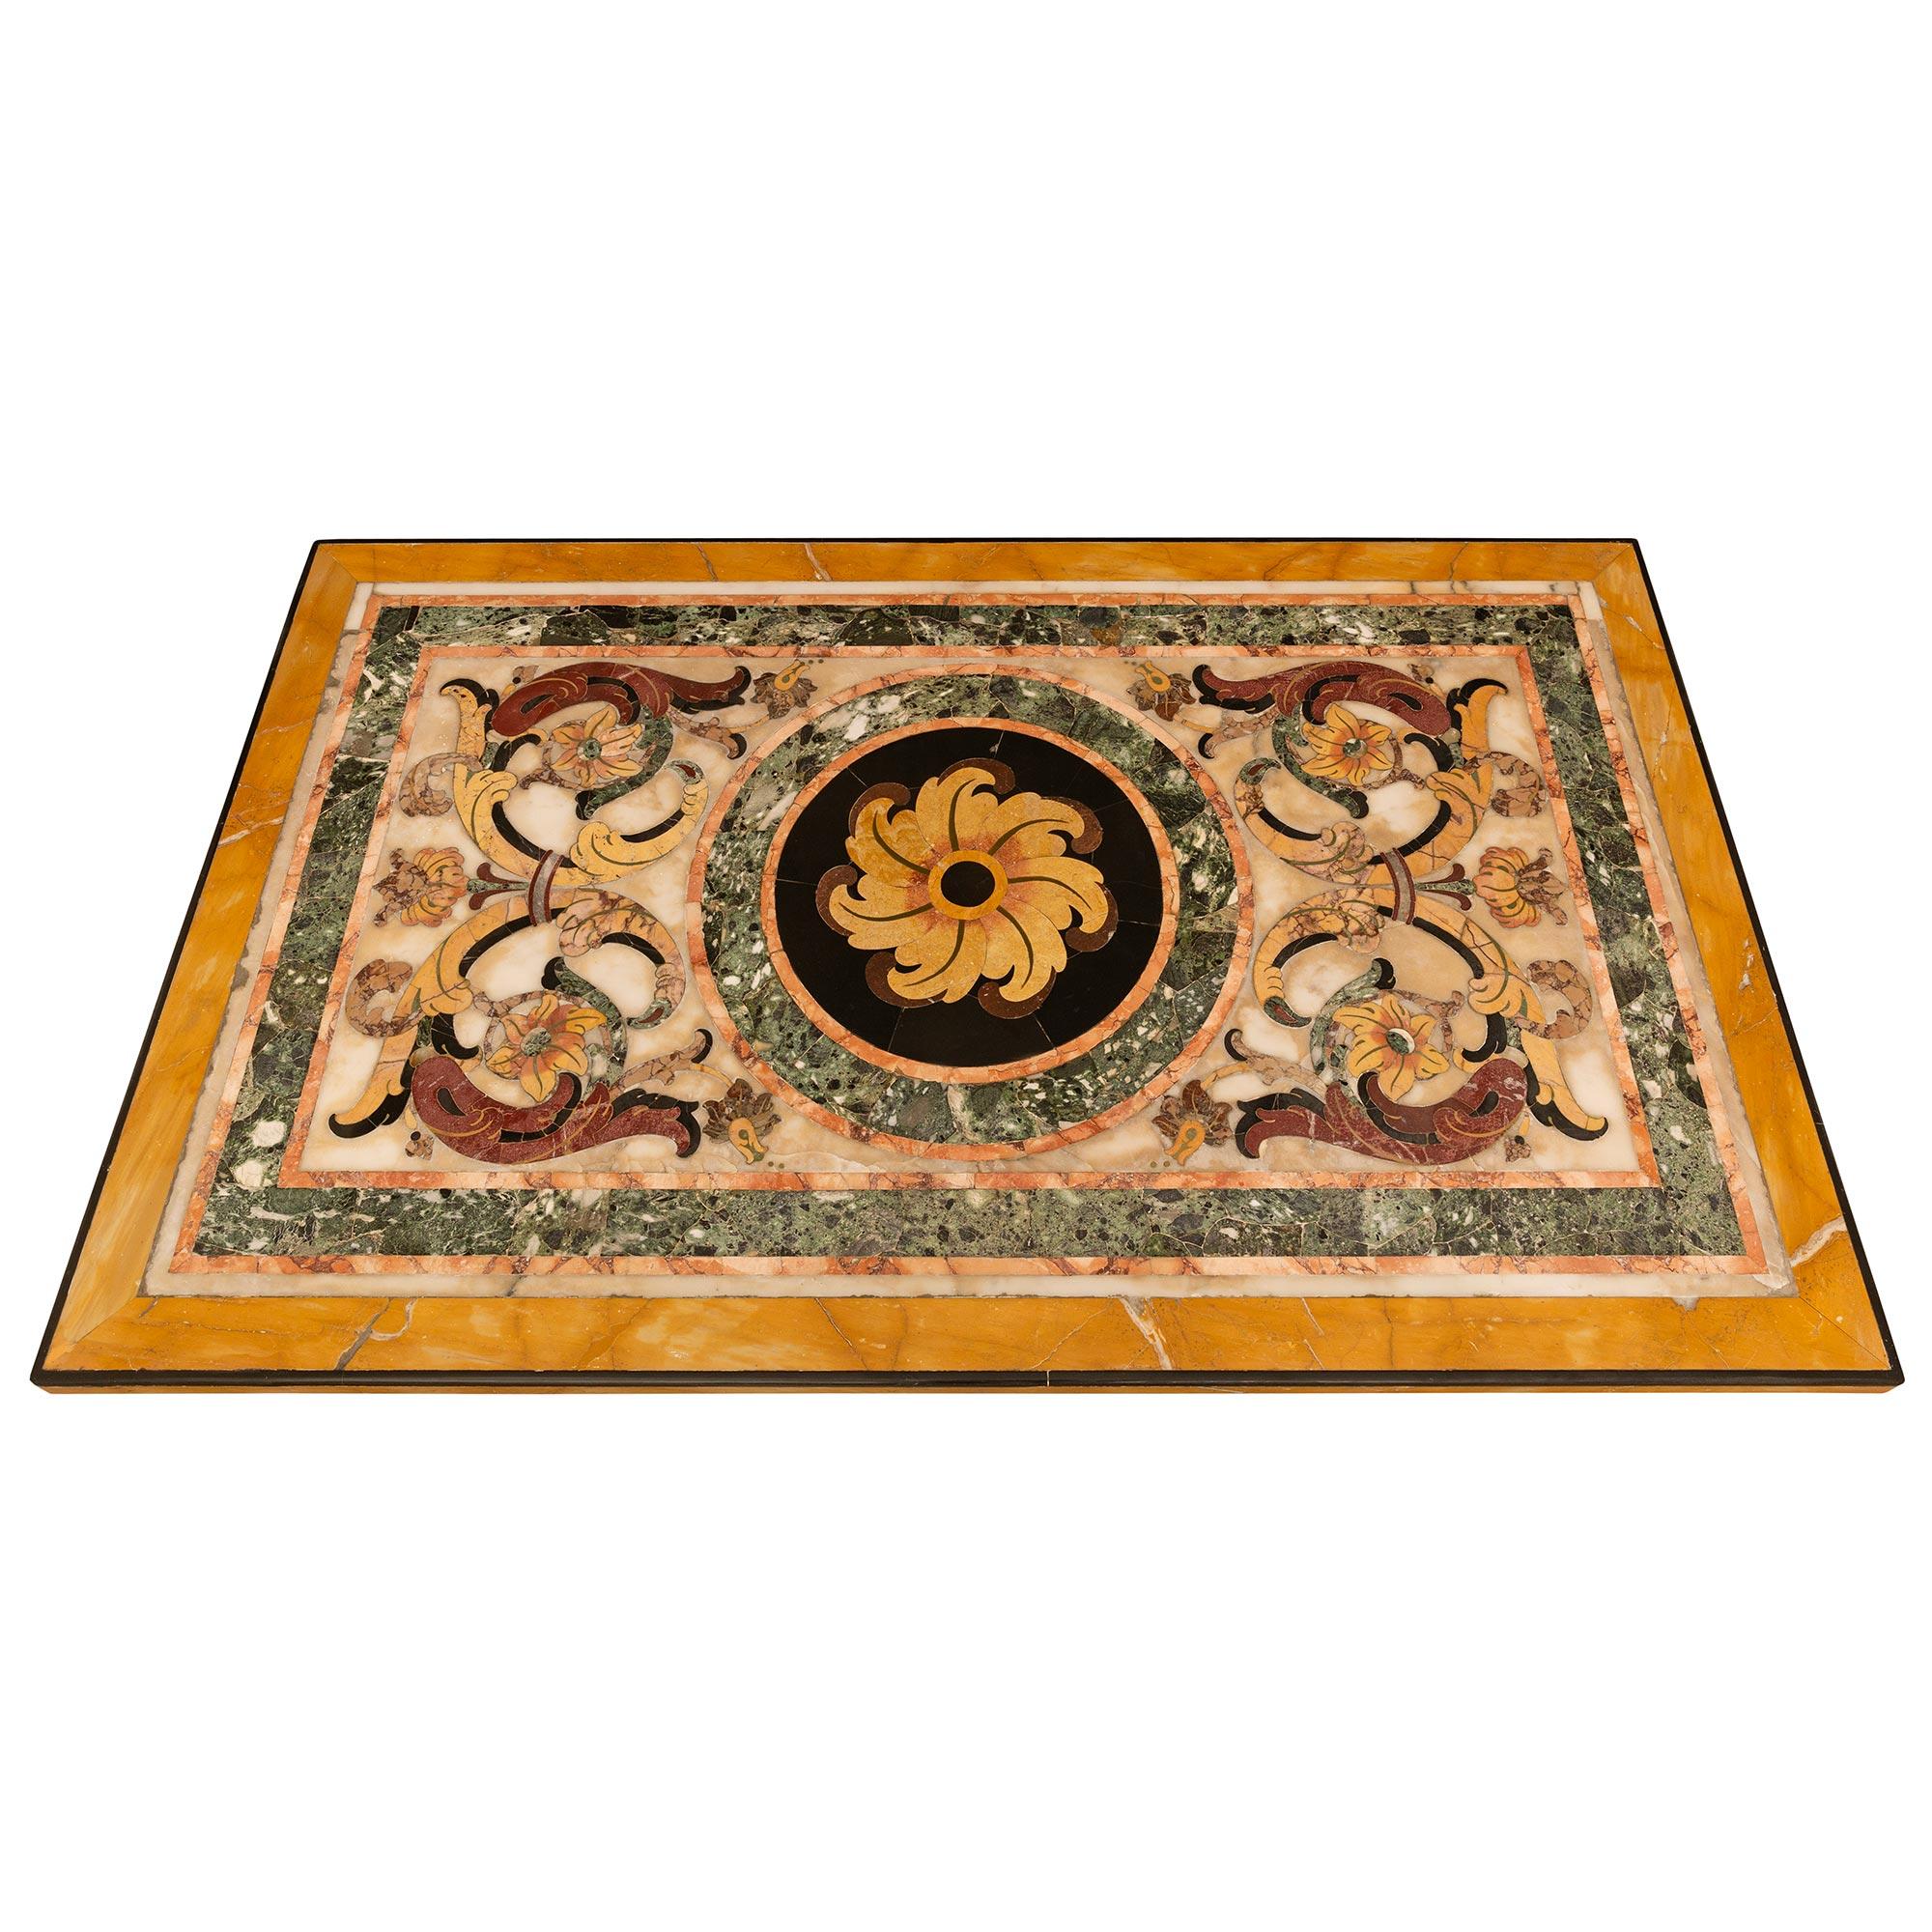 A most attractive Italian early 18th century Pietra Dura Marble, Wrought Iron and Brass coffee table. The most stunning Pietra Dura marble plateau is supported by a wonderful Wrought Iron base with two horseshoe shaped legs connect in the center by